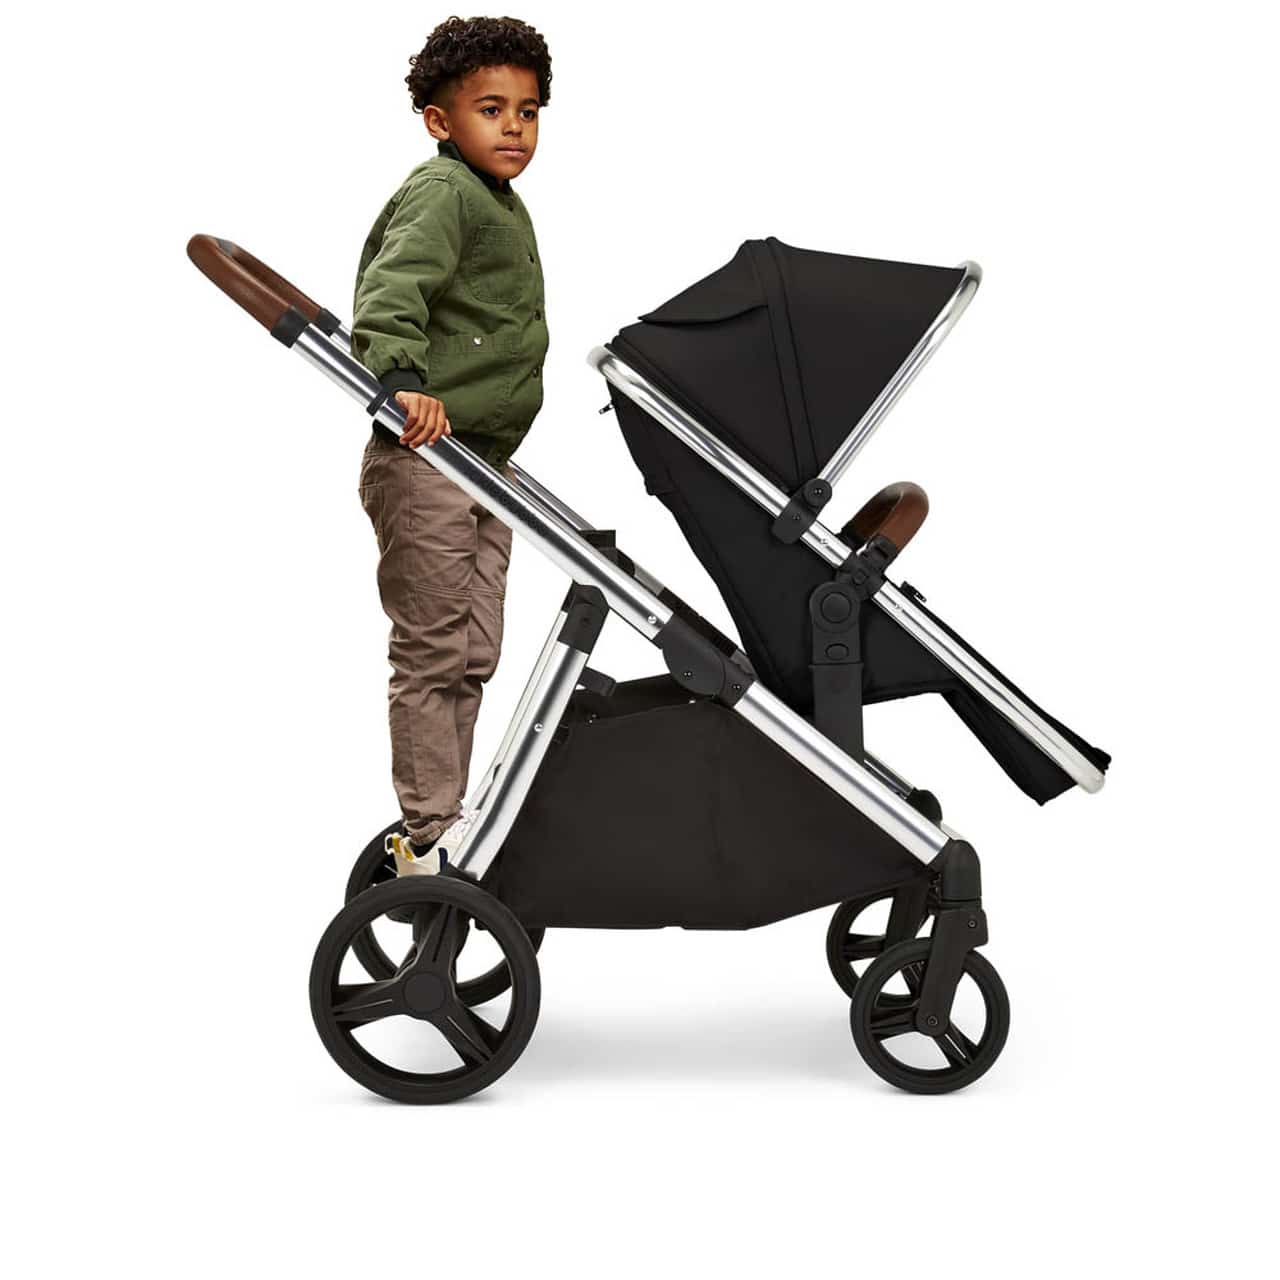 Ickle Bubba Eclipse Isofix Travel System with Standing Board - Jet Black  (Tan Handles) - Baby and Child Store